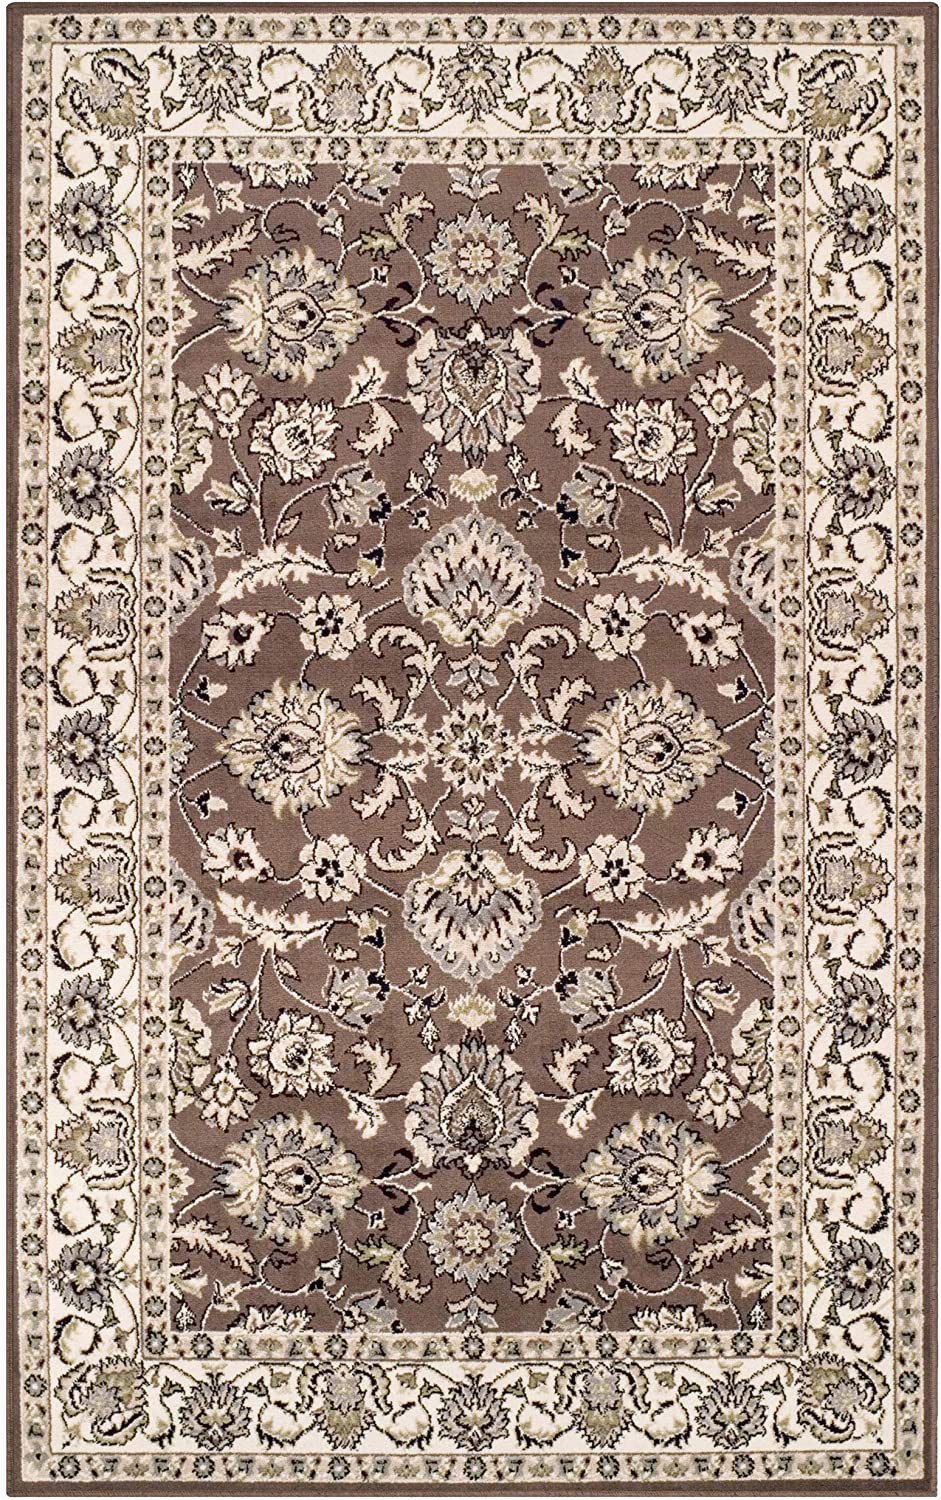 Dark Brown 8×10 area Rug Superior Lille 8 X 10 area Rug Contemporary Living Room & Bedroom area Rug Anti Static and Water Repellent for Residential or Mercial Use